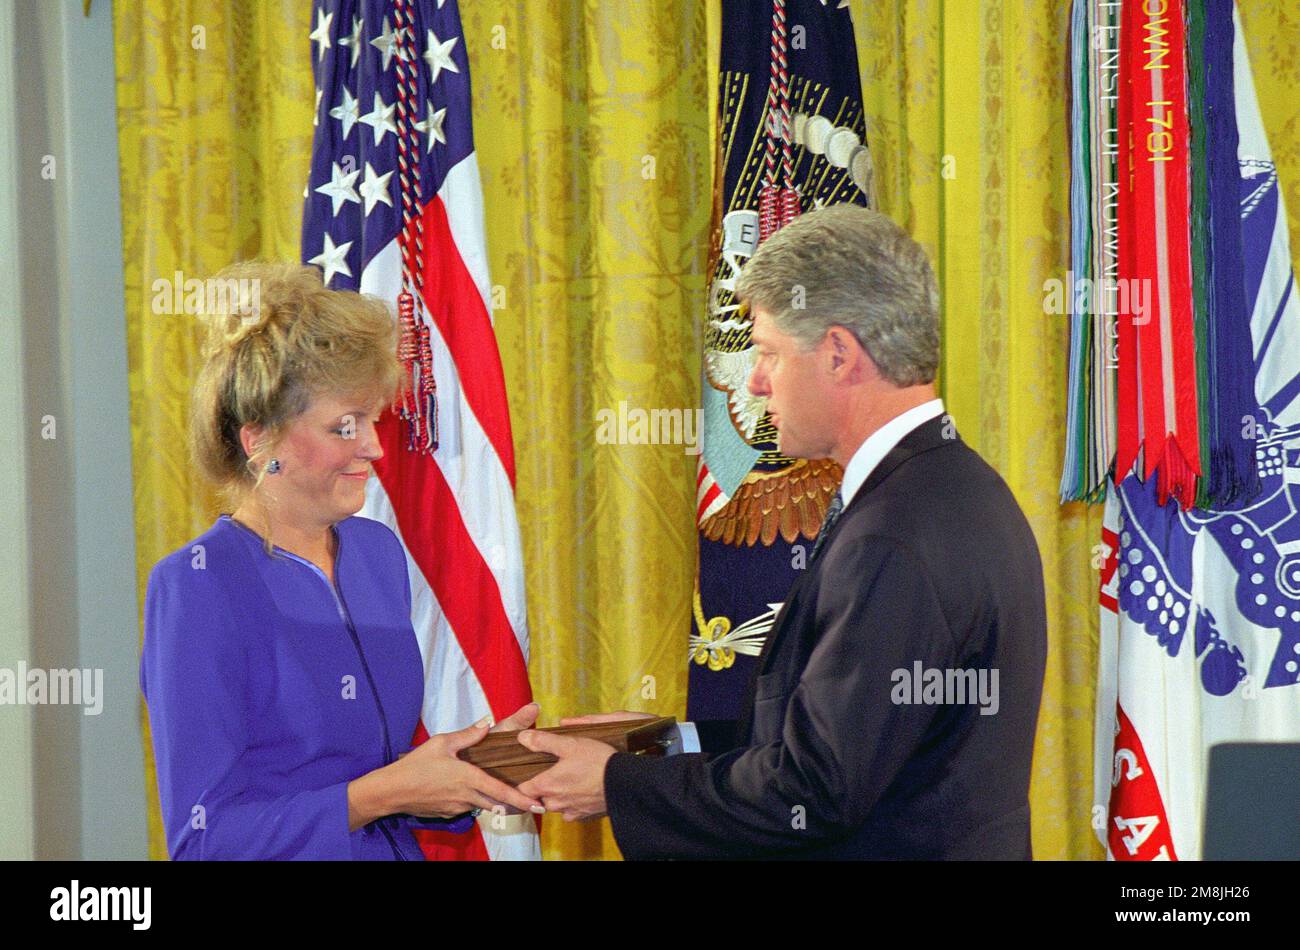 The President of the United States, William J. Clinton presented the nation's highest award for military valor The Medal of Honor (Posthumously) to Carmen, the widow of MASTER Sergeant Gary I. Gordon. He and his Sniper Team Member were killed on 03 October 1993, while serving as Team Leader, United States Army Special Operation Command with Task Force Ranger in Mogadishu, Somalia. They provided precision sniper fires from the lead helicopter during an assault on a building and at two helicopter crash sites, while subjected to intense automatic weapons and rocket propelled grenade fires. Base: Stock Photo